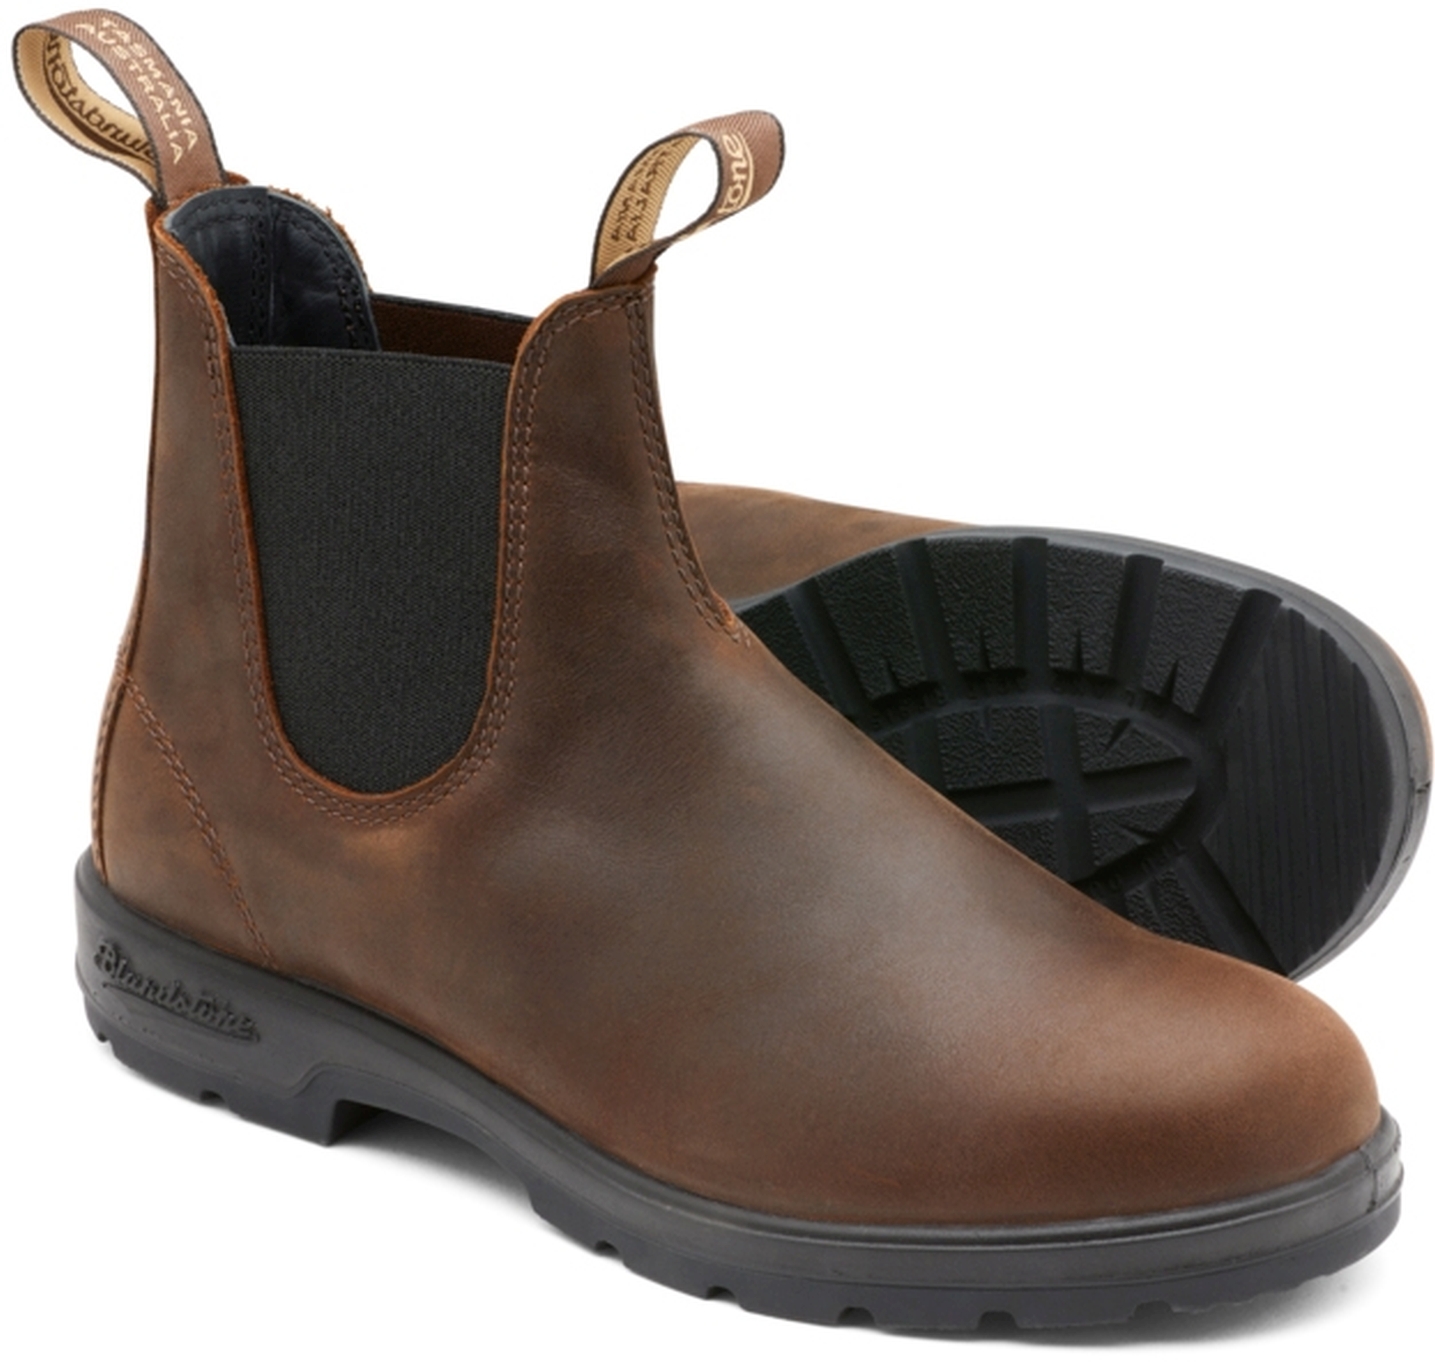 Blundstone Blundstone 1609 Antique Brown Leather (550 Series) Calf leather